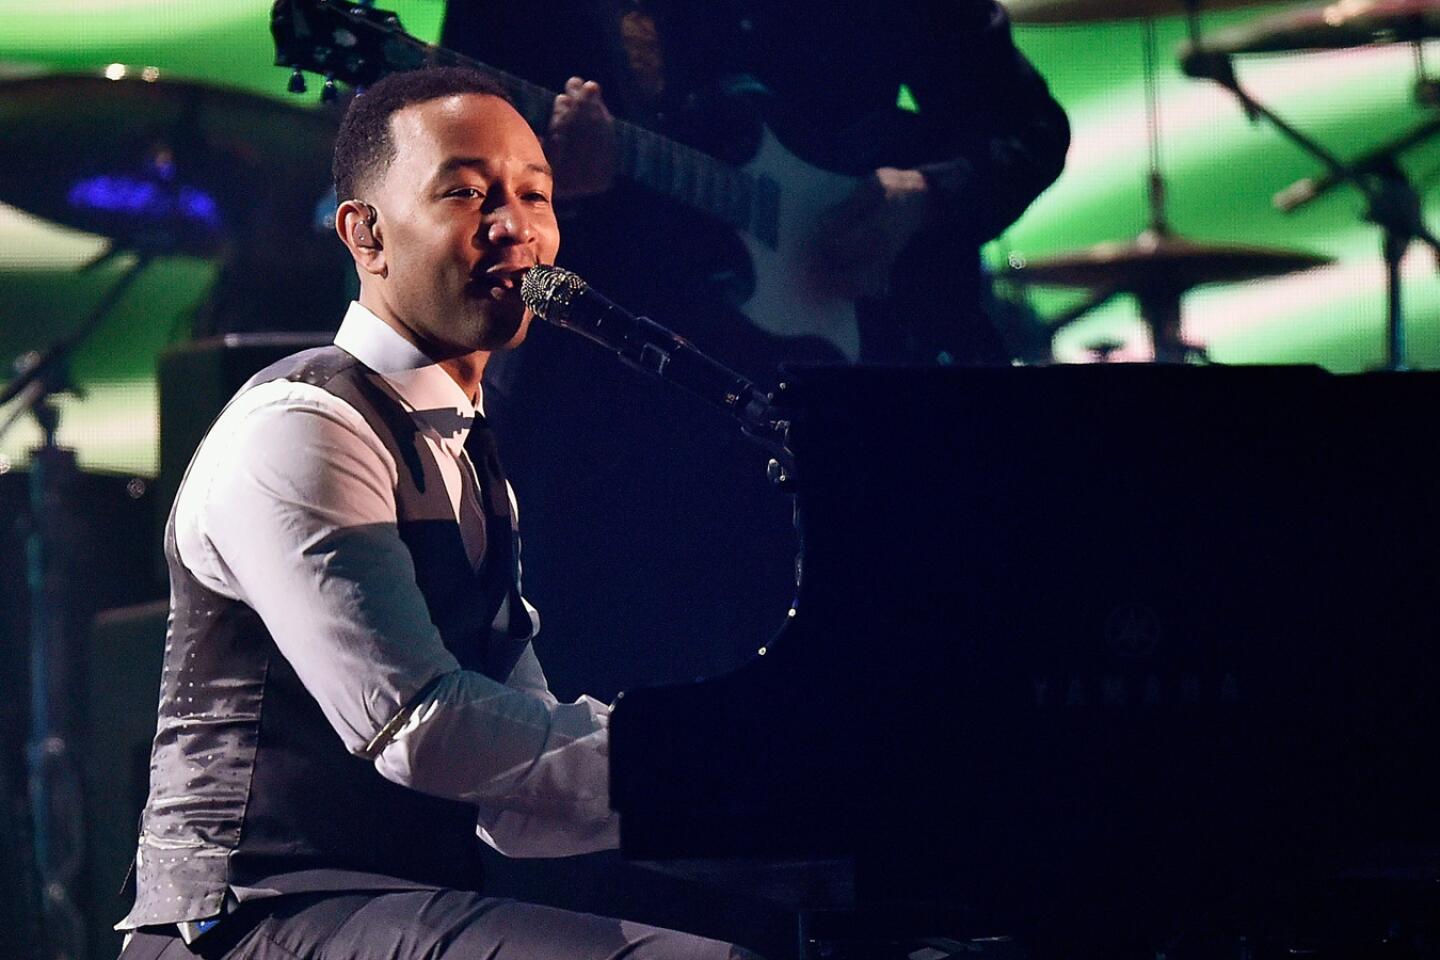 John Legend performs "East" for a tribute to MusiCares Person of the Year honoree Lionel Richie.